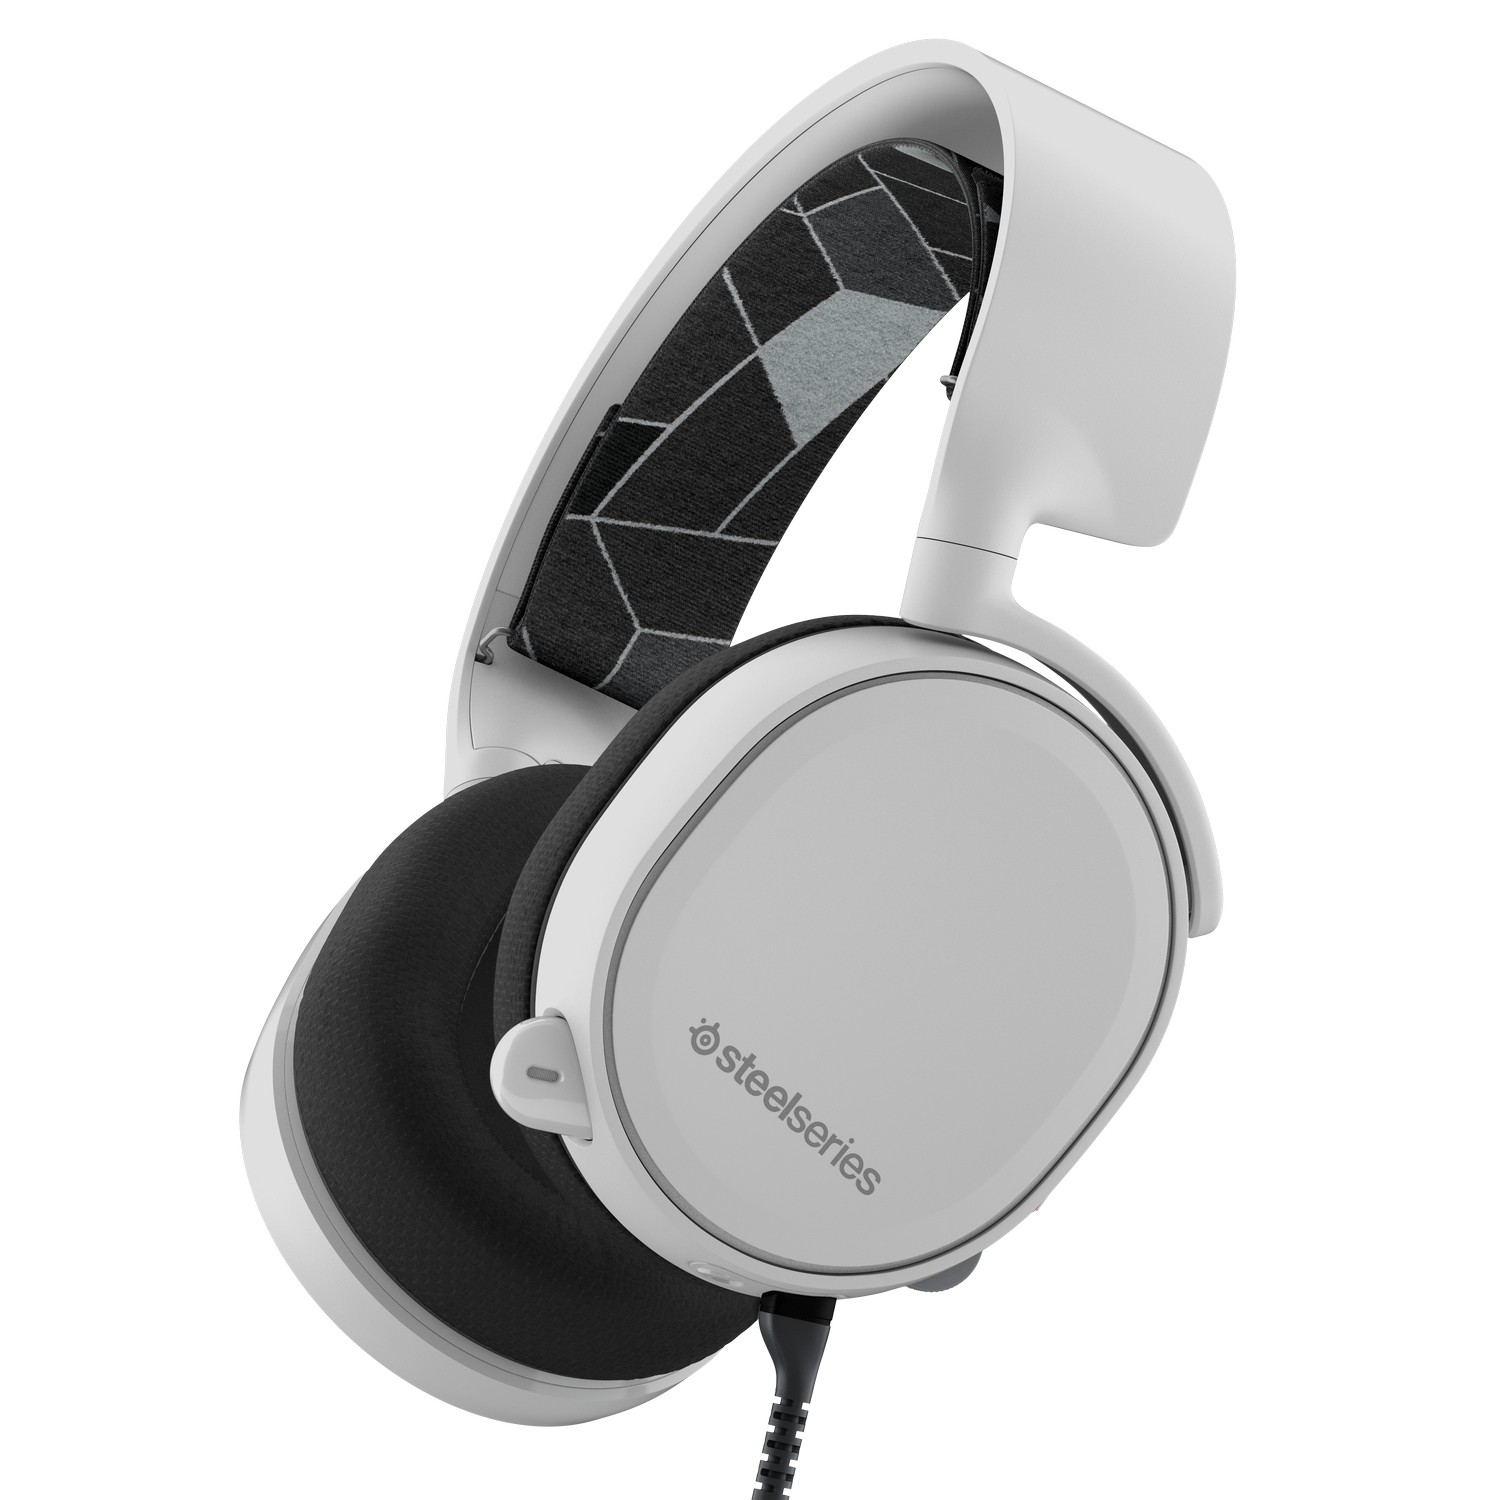 SteelSeries - SteelSeries Arctis 3 7.1 Surround Gaming Headset - White (61506) 2019 Edition